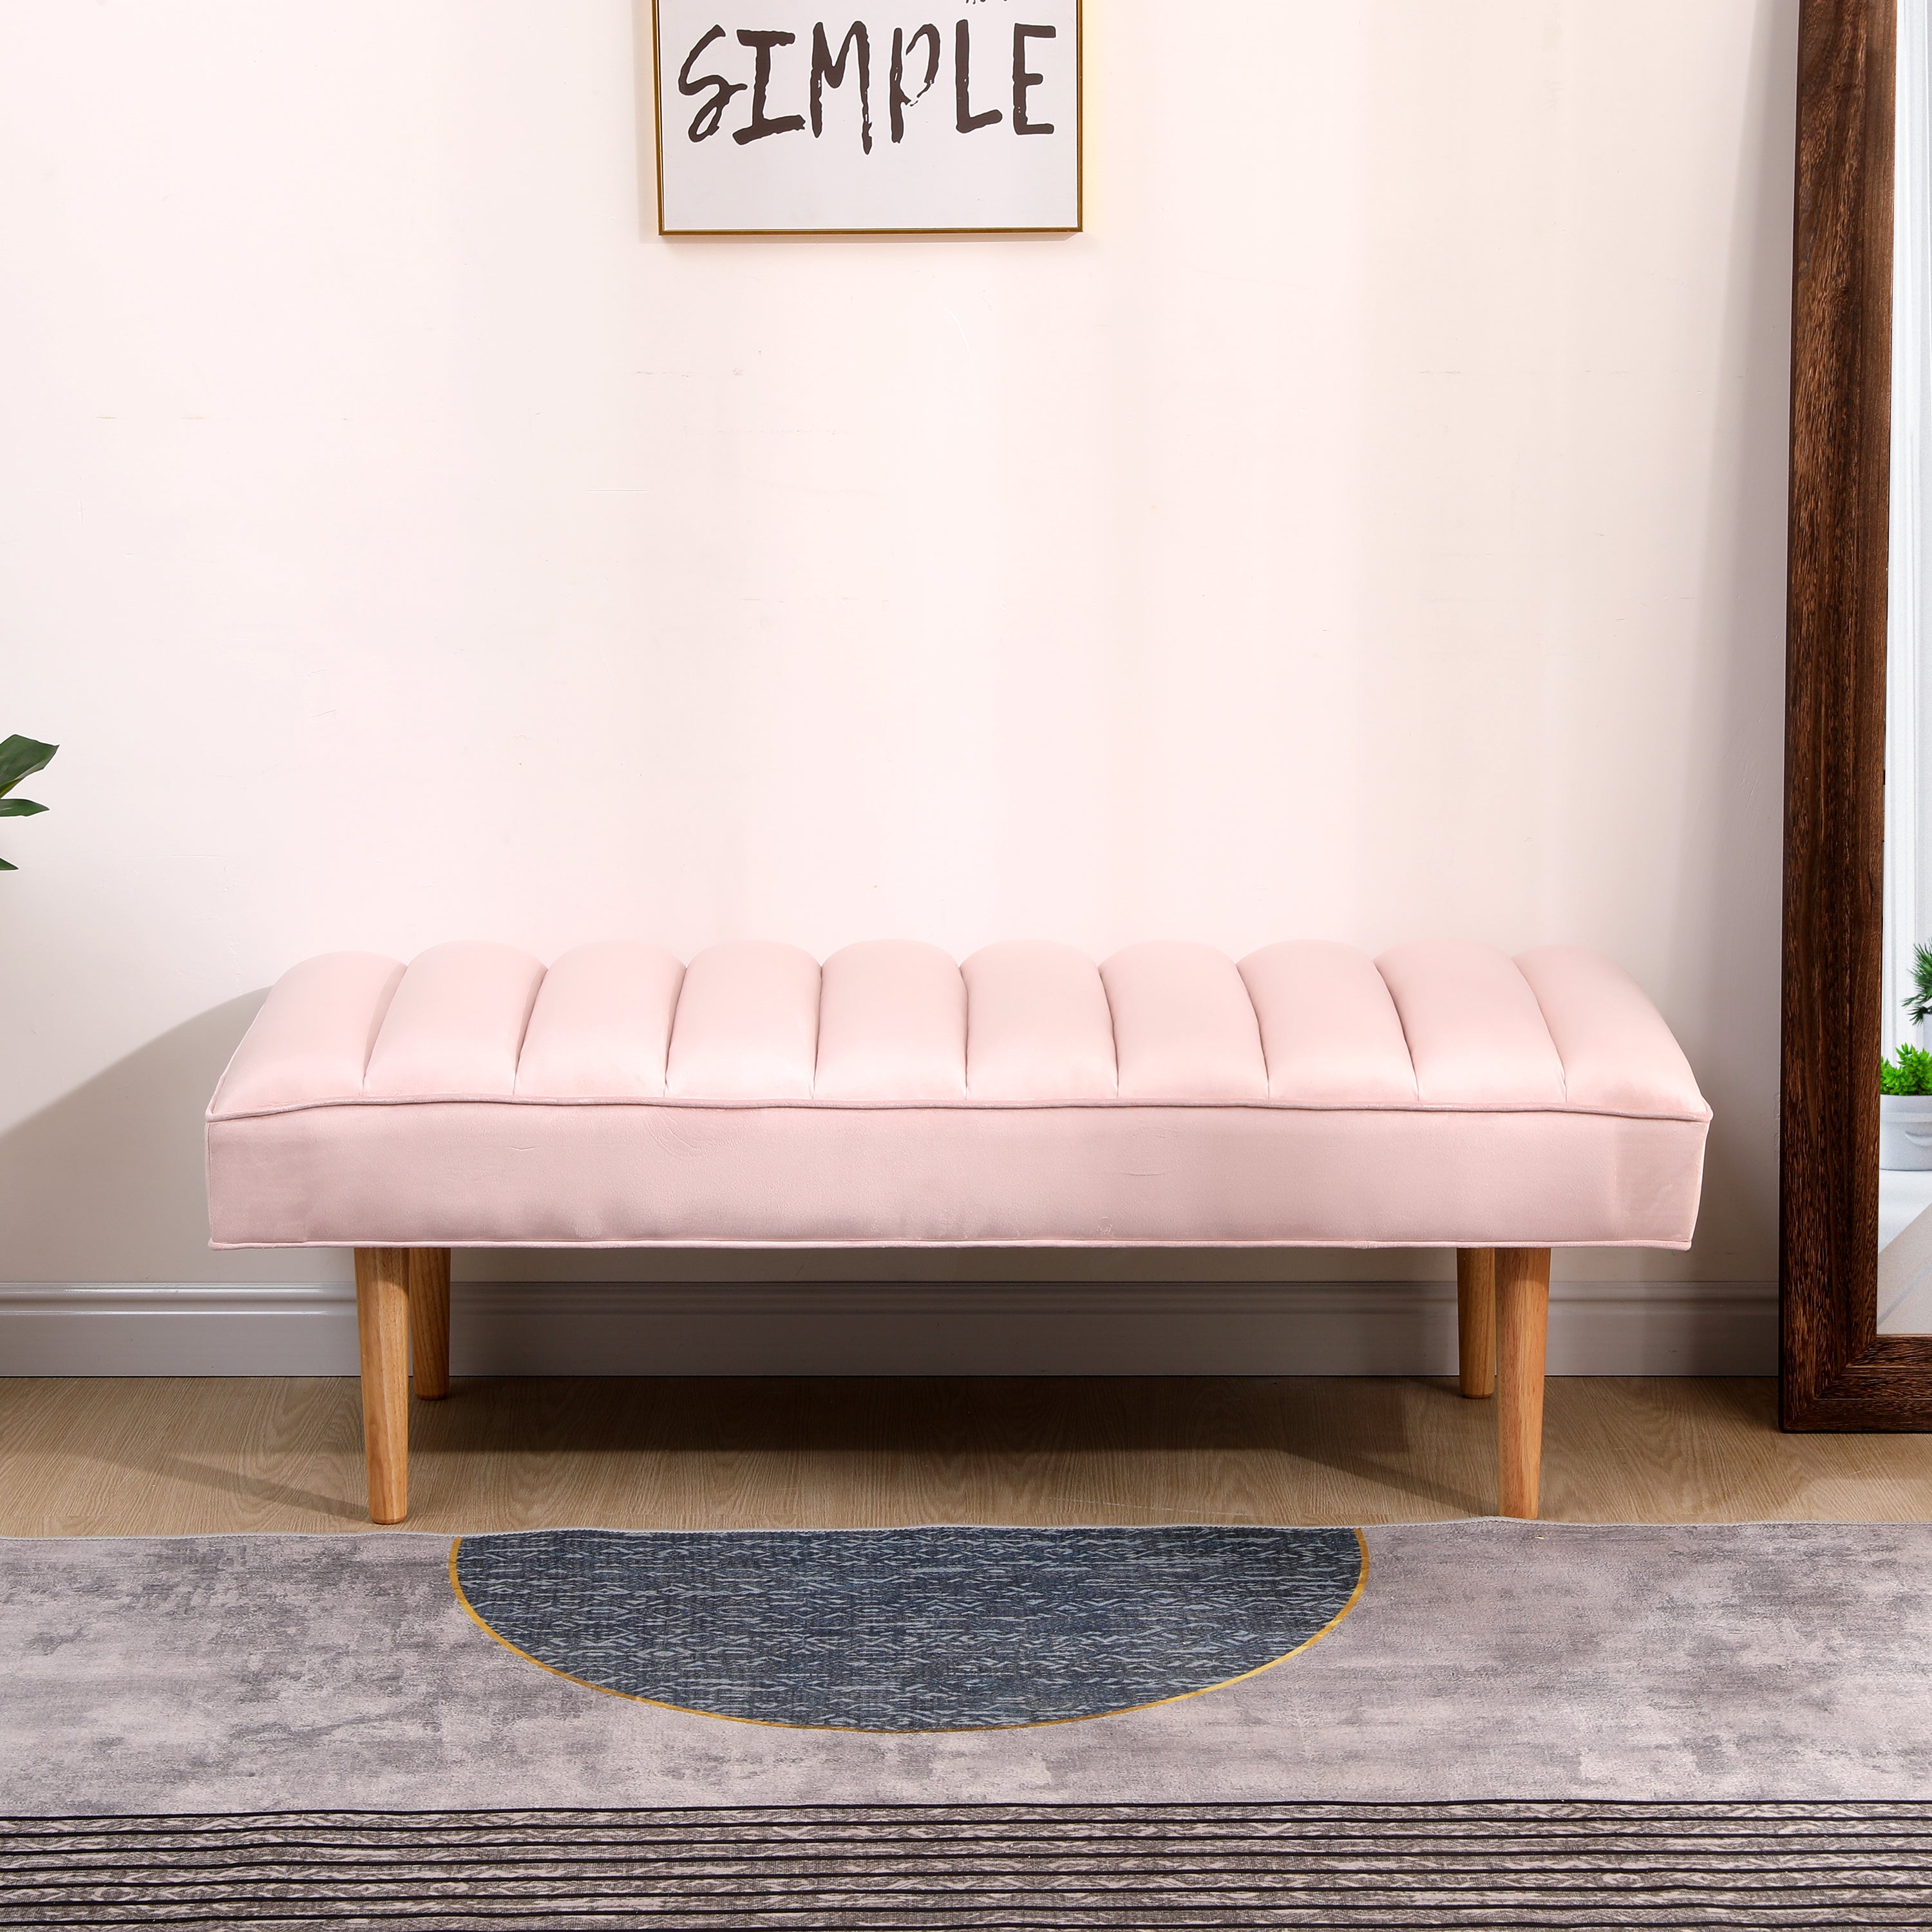 Pink-Velvet-Upholstered-Bench-Channel-Tufted-Bedroom-Ottoman-with-Wood-Legs-Home-Furniture-(Pink)-Storage-&-Entryway-Benches